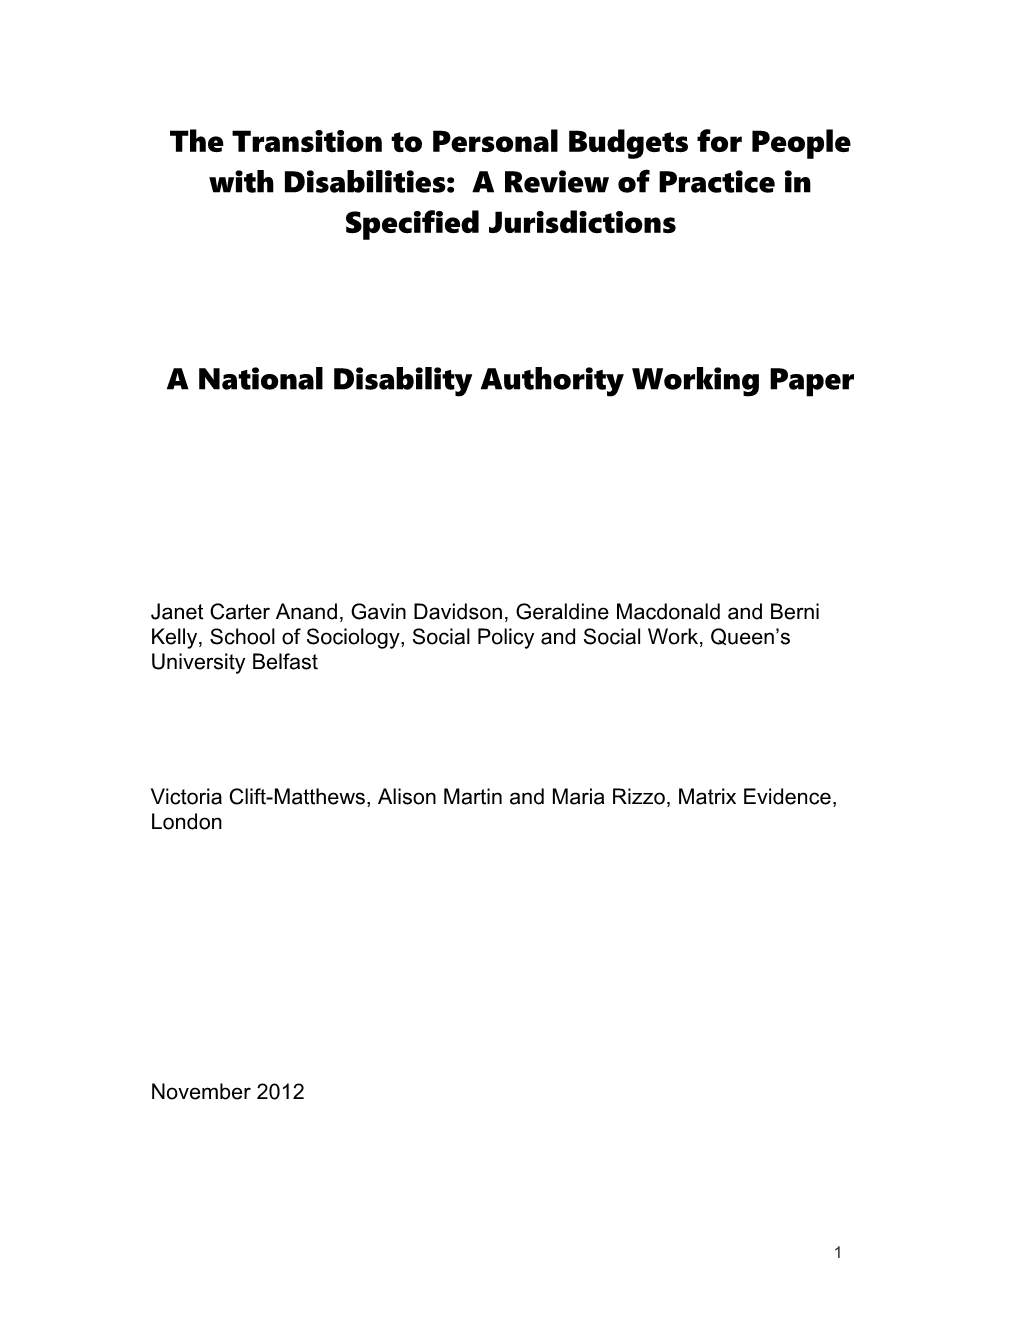 The Transition to Personal Budgets for People with Disabilities: a Review of Practice In